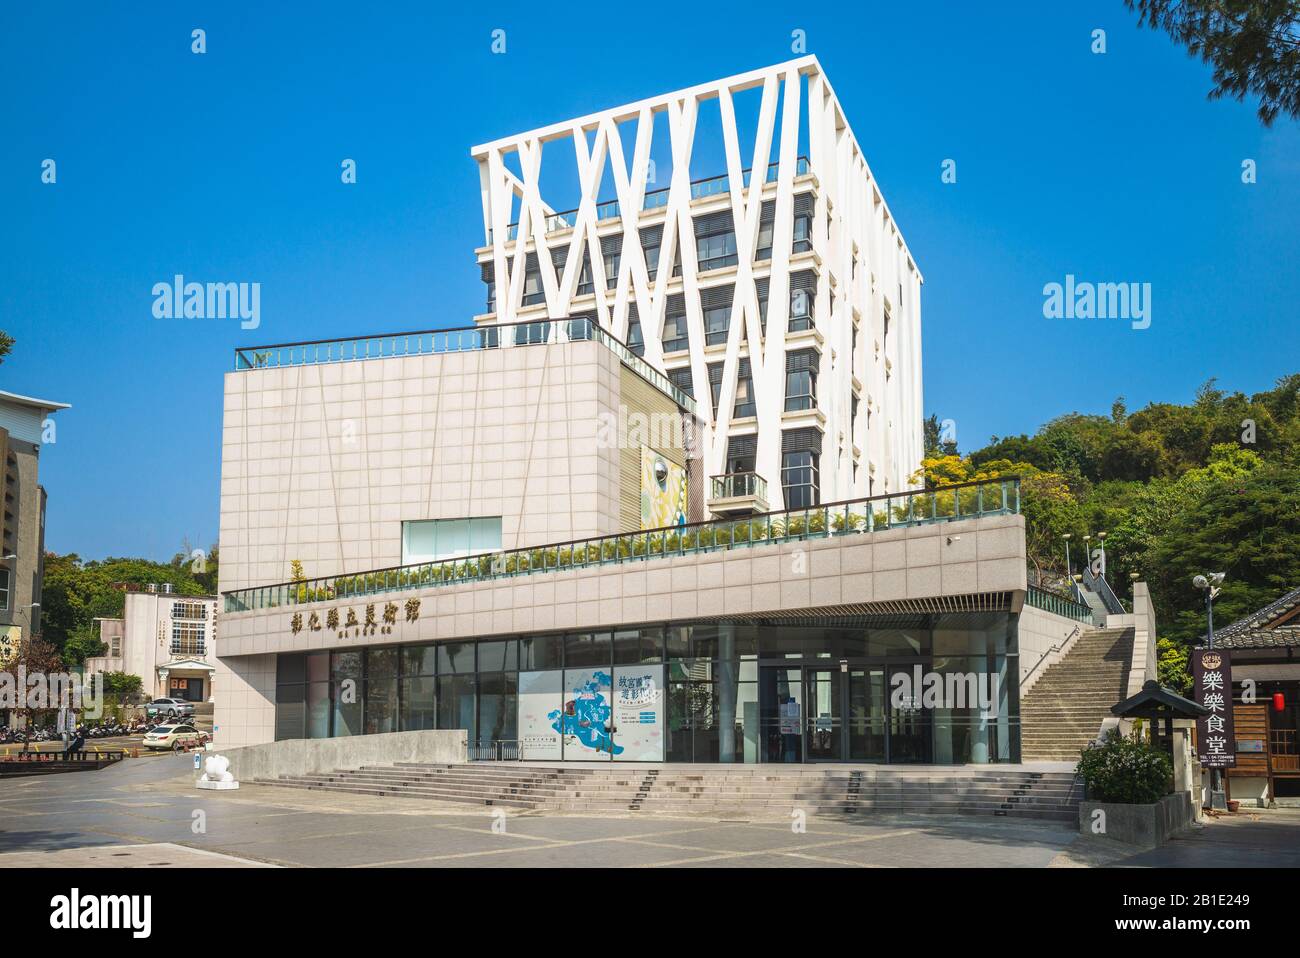 Changhua, Taiwan - February 24, 2020: Changhua County Art Museum. The museum was constructed at a cost of NT$411 million and opened on 25 November 201 Stock Photo